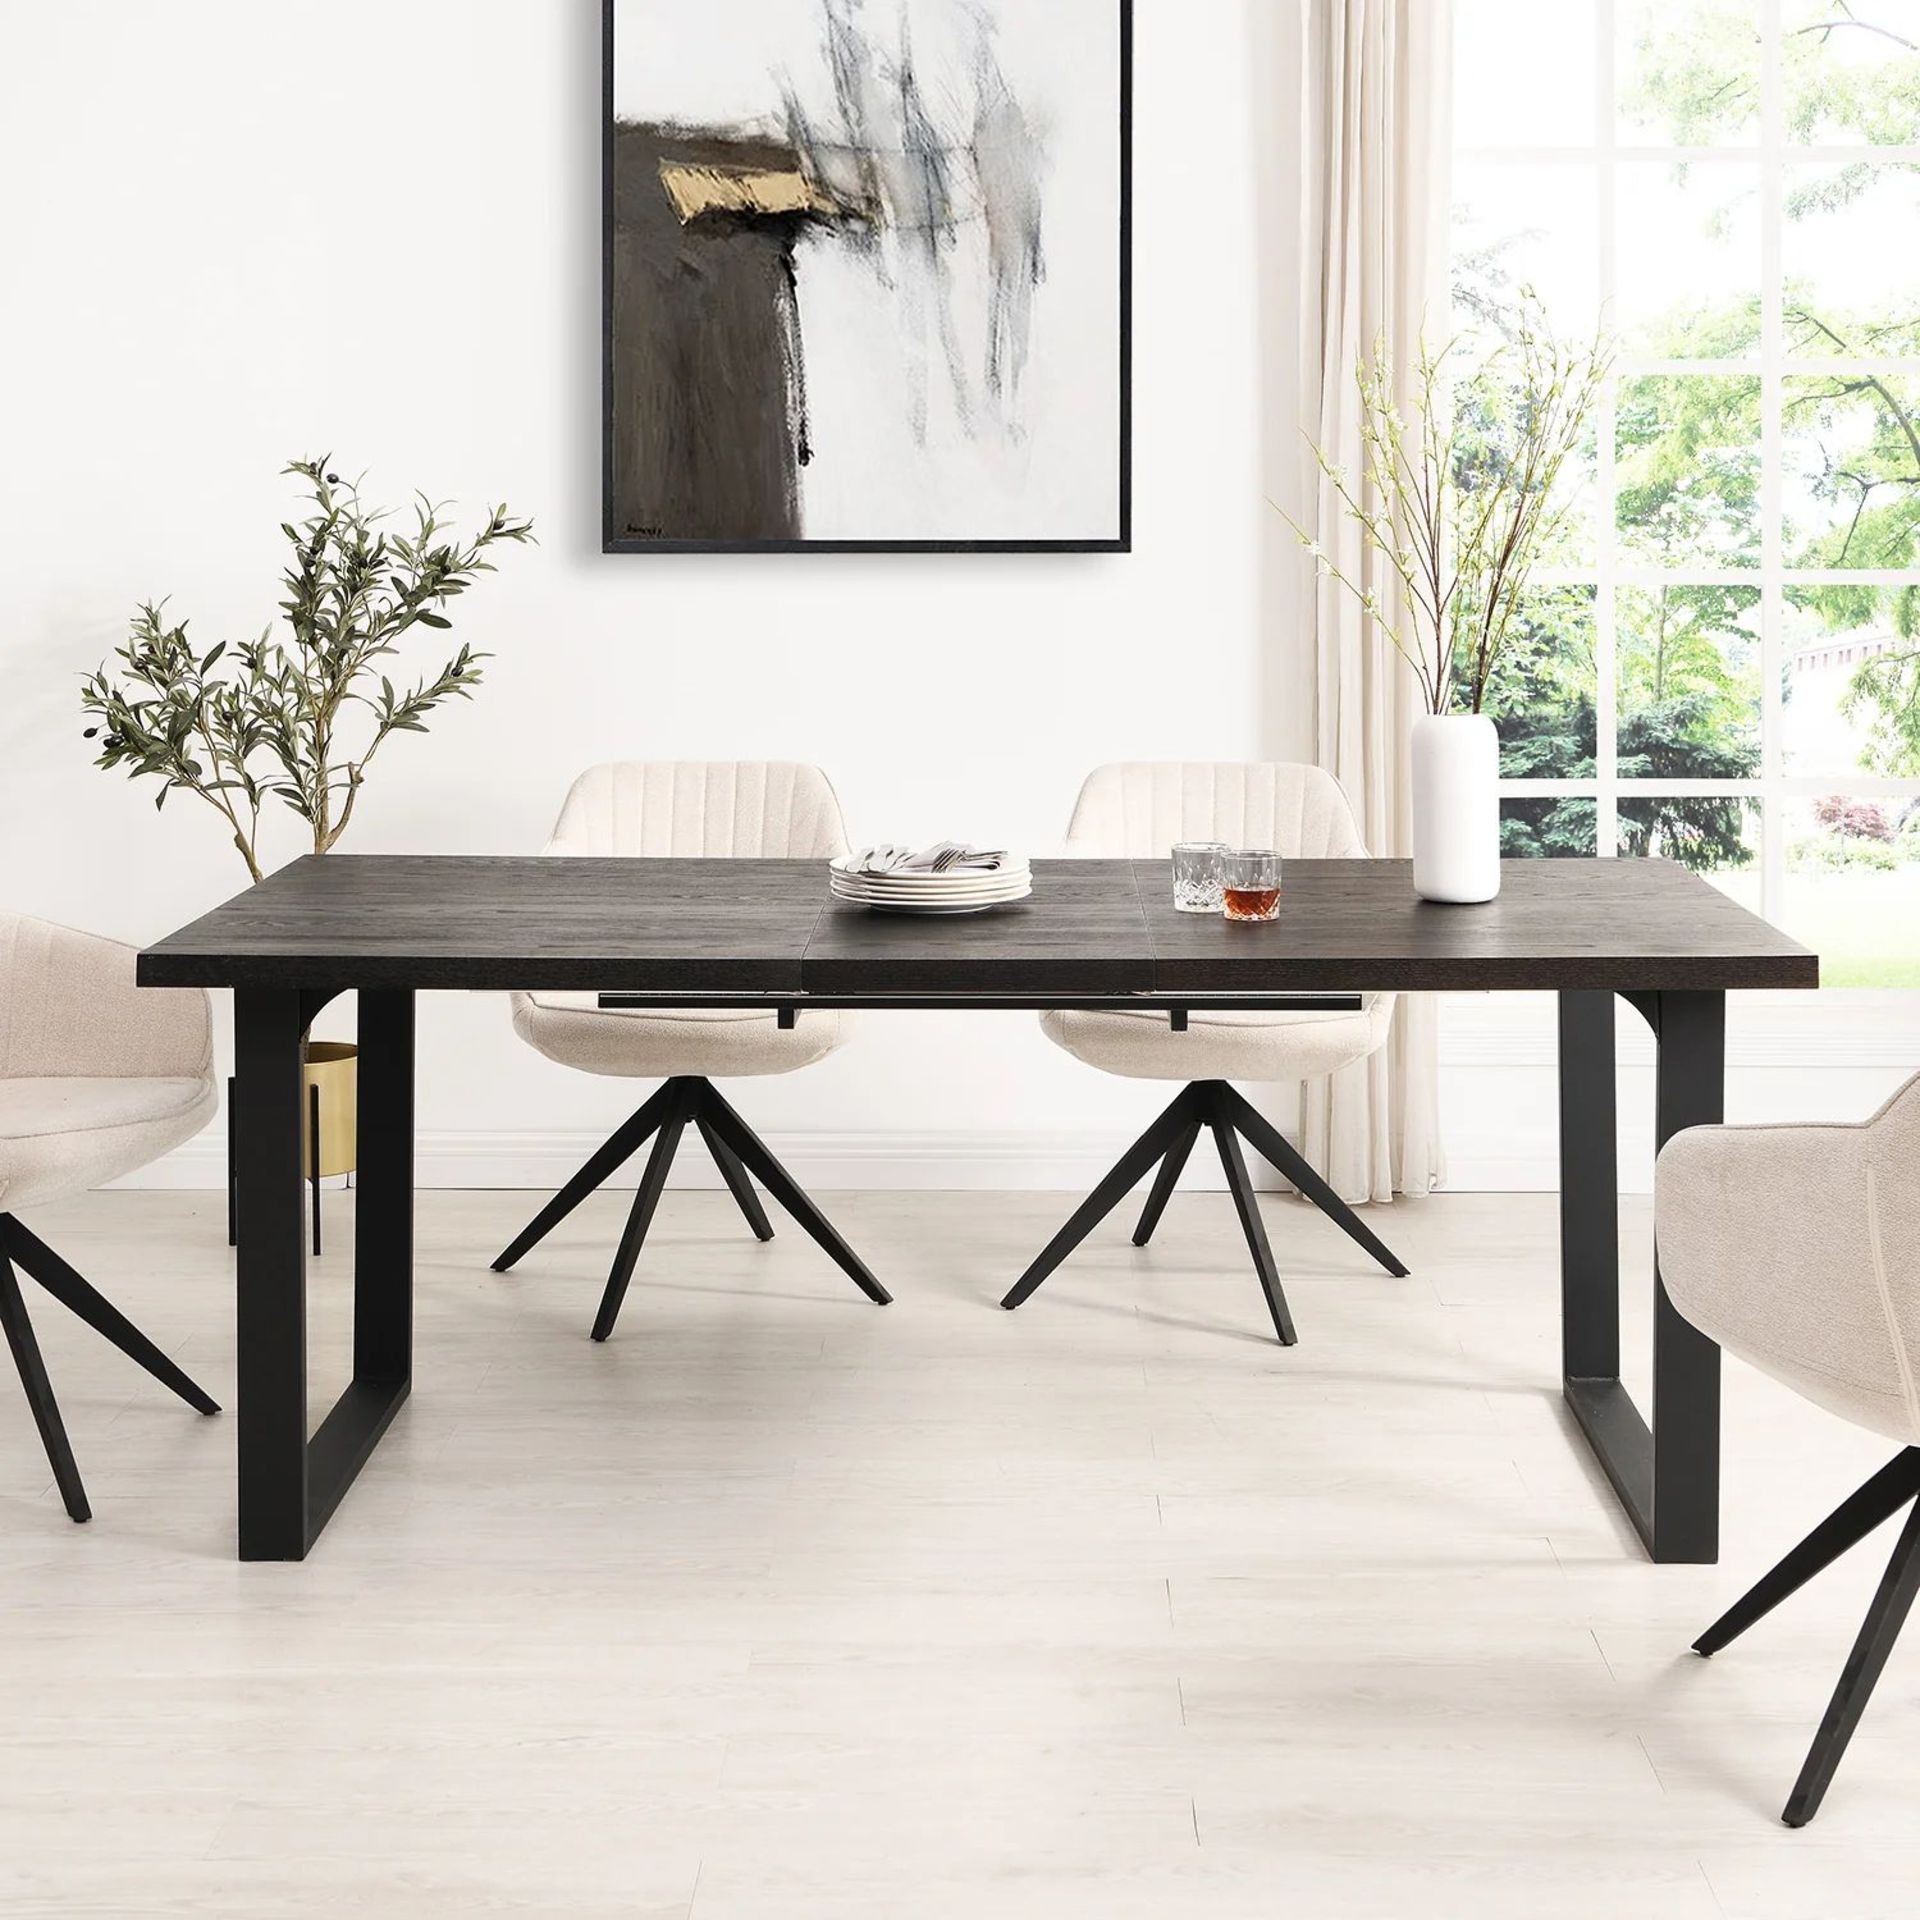 BERN 6-8 Seater Dark Oak Extending Dining Table with Metal Legs. - R19.5. RRP £439.99. The table top - Image 2 of 2